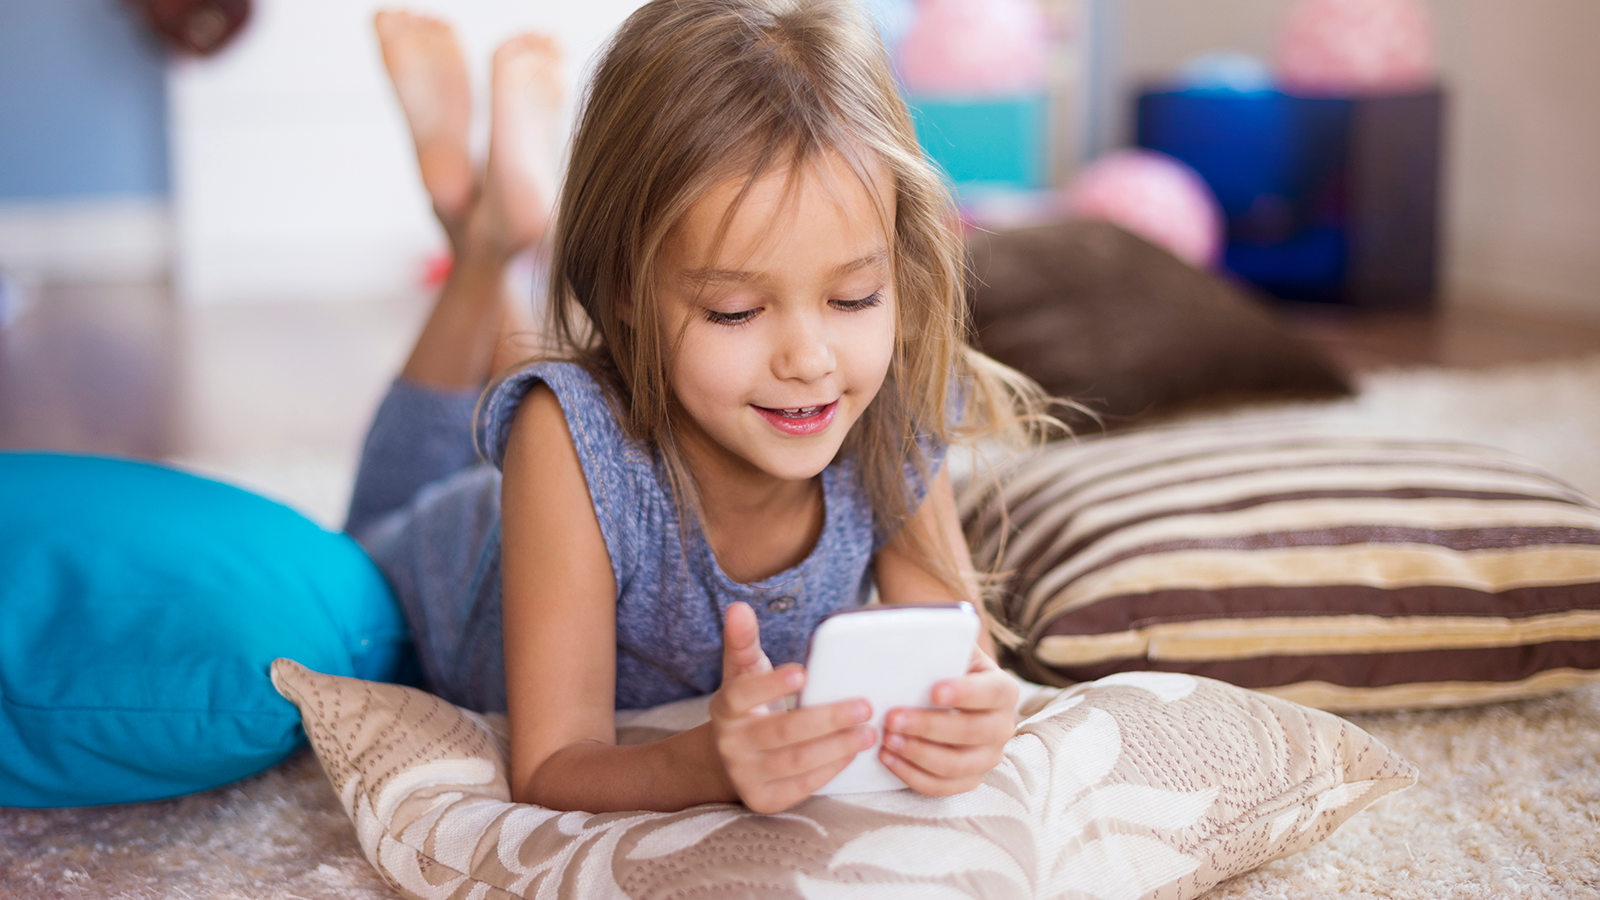 More 5- to 7-year-olds are online than ever before, with many unsupervised – Ofcom